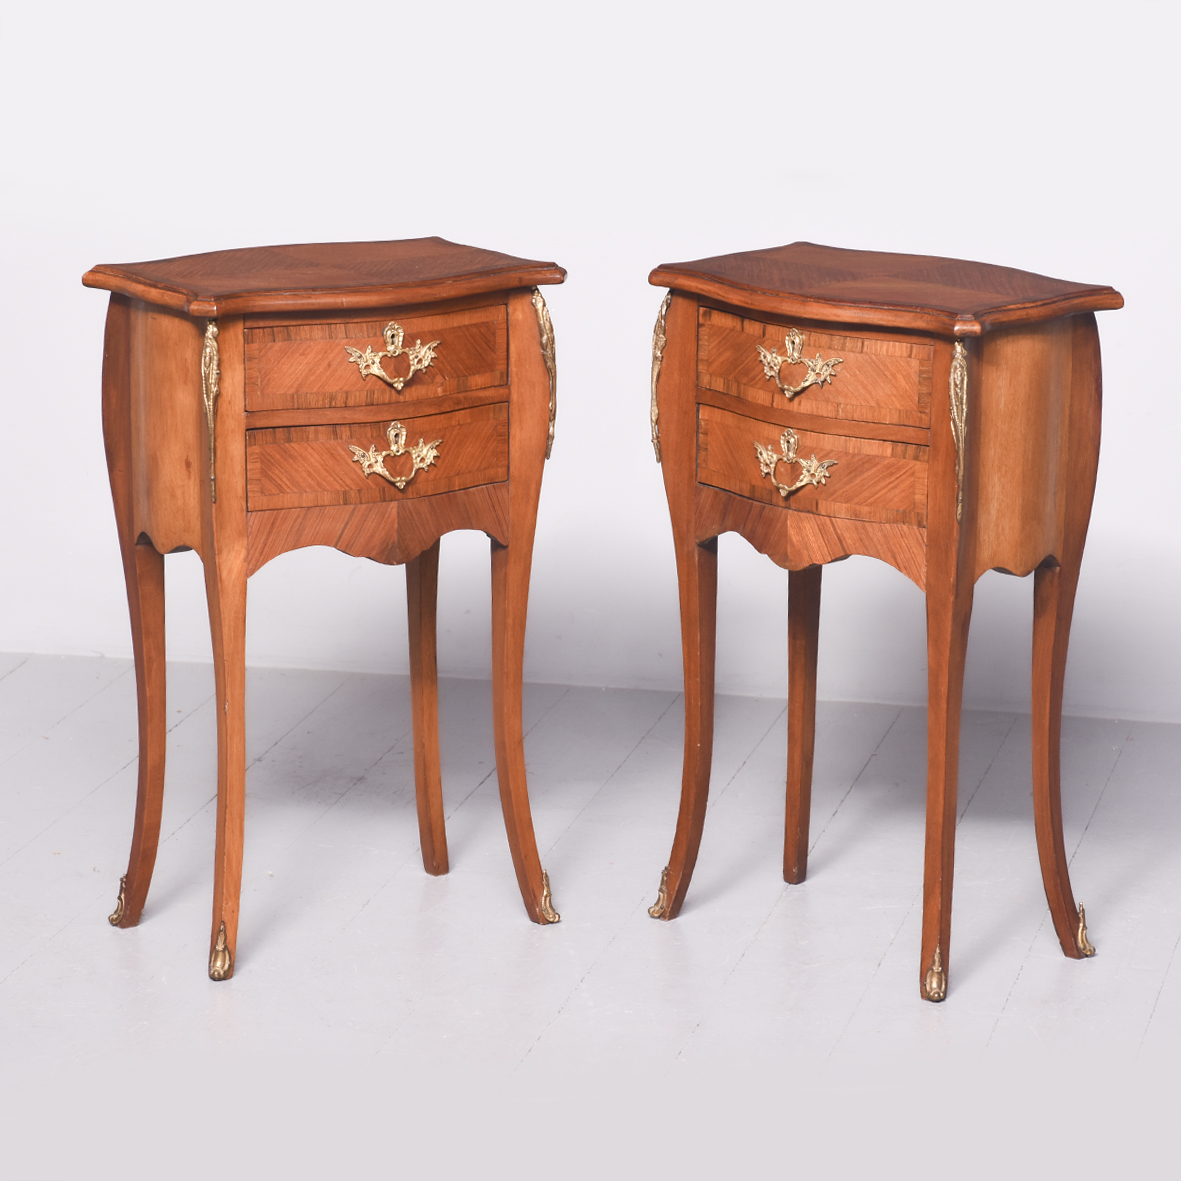 Pair of Freestanding Crossbanded Walnut French Bedside Lockers or Lamp Tables Antique Furniture